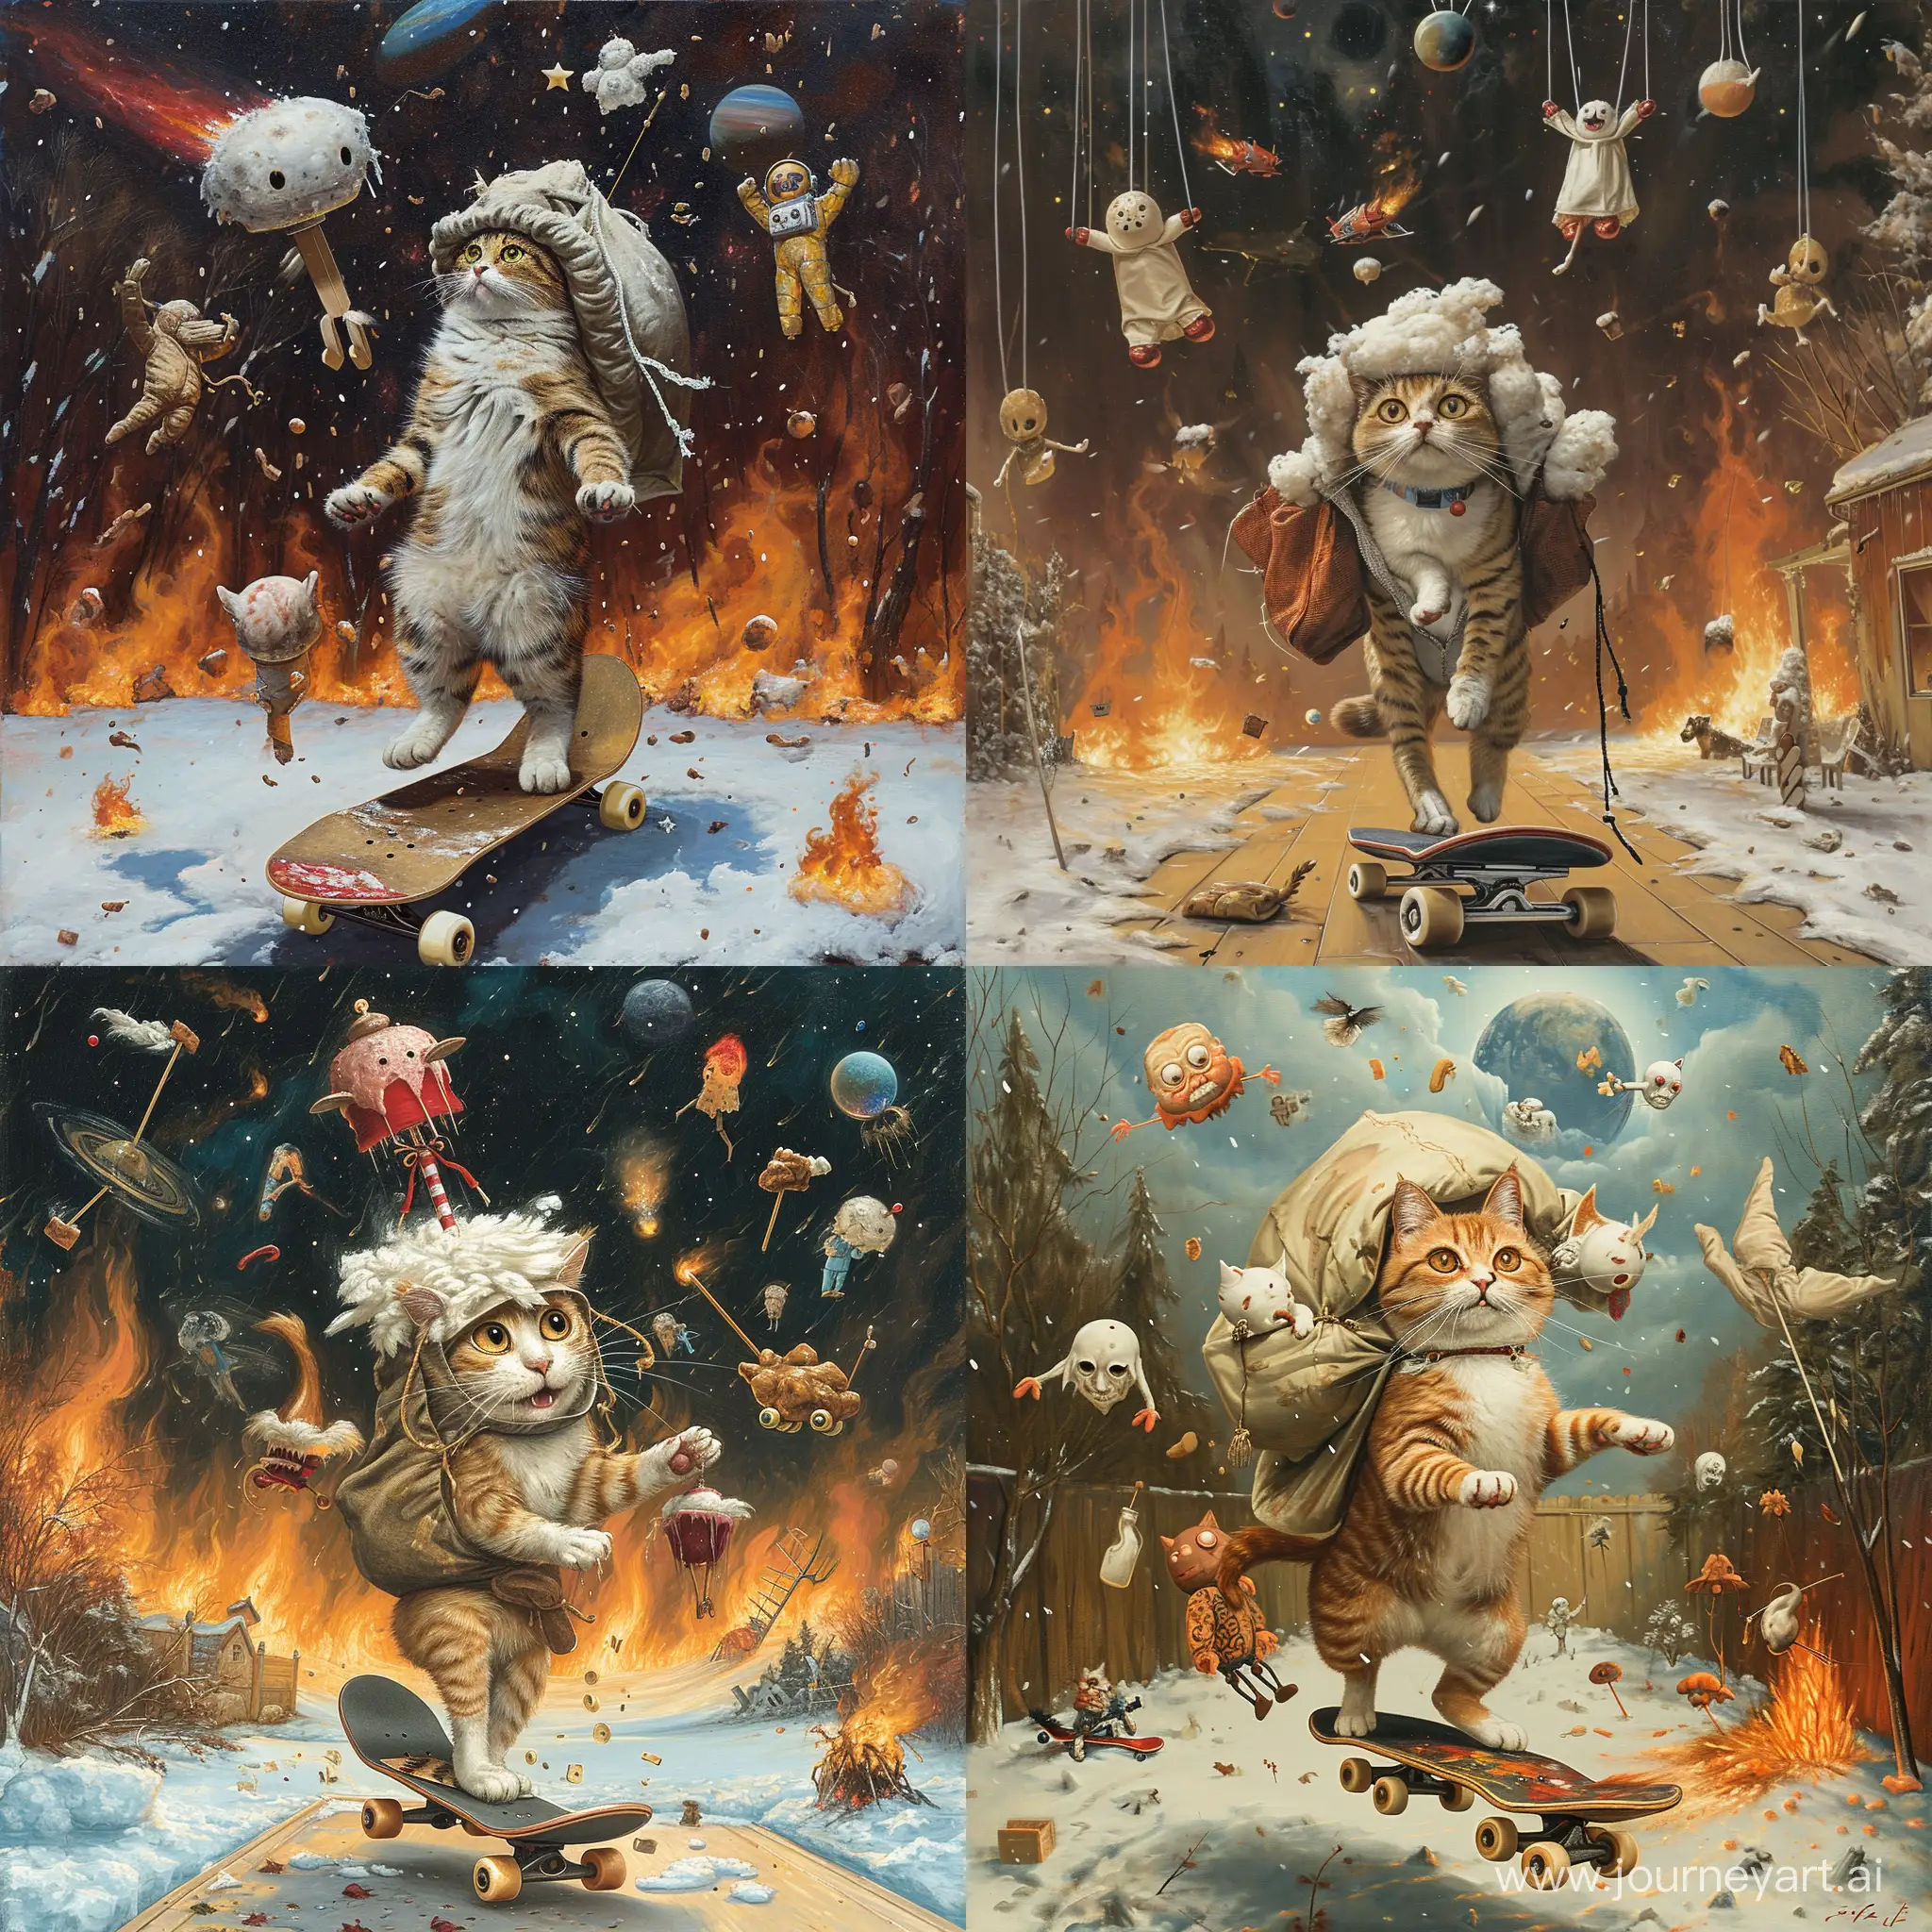 a cat wearing a bag of flocks on its head, gubbing a smock in its hands, while branling on a skateboard in the snow. puppets falling from the sky, flames in the background. icecream melting everywhere, beautiful space sky, in a backyard. classical painting style, clean brush strokes, smooth wash